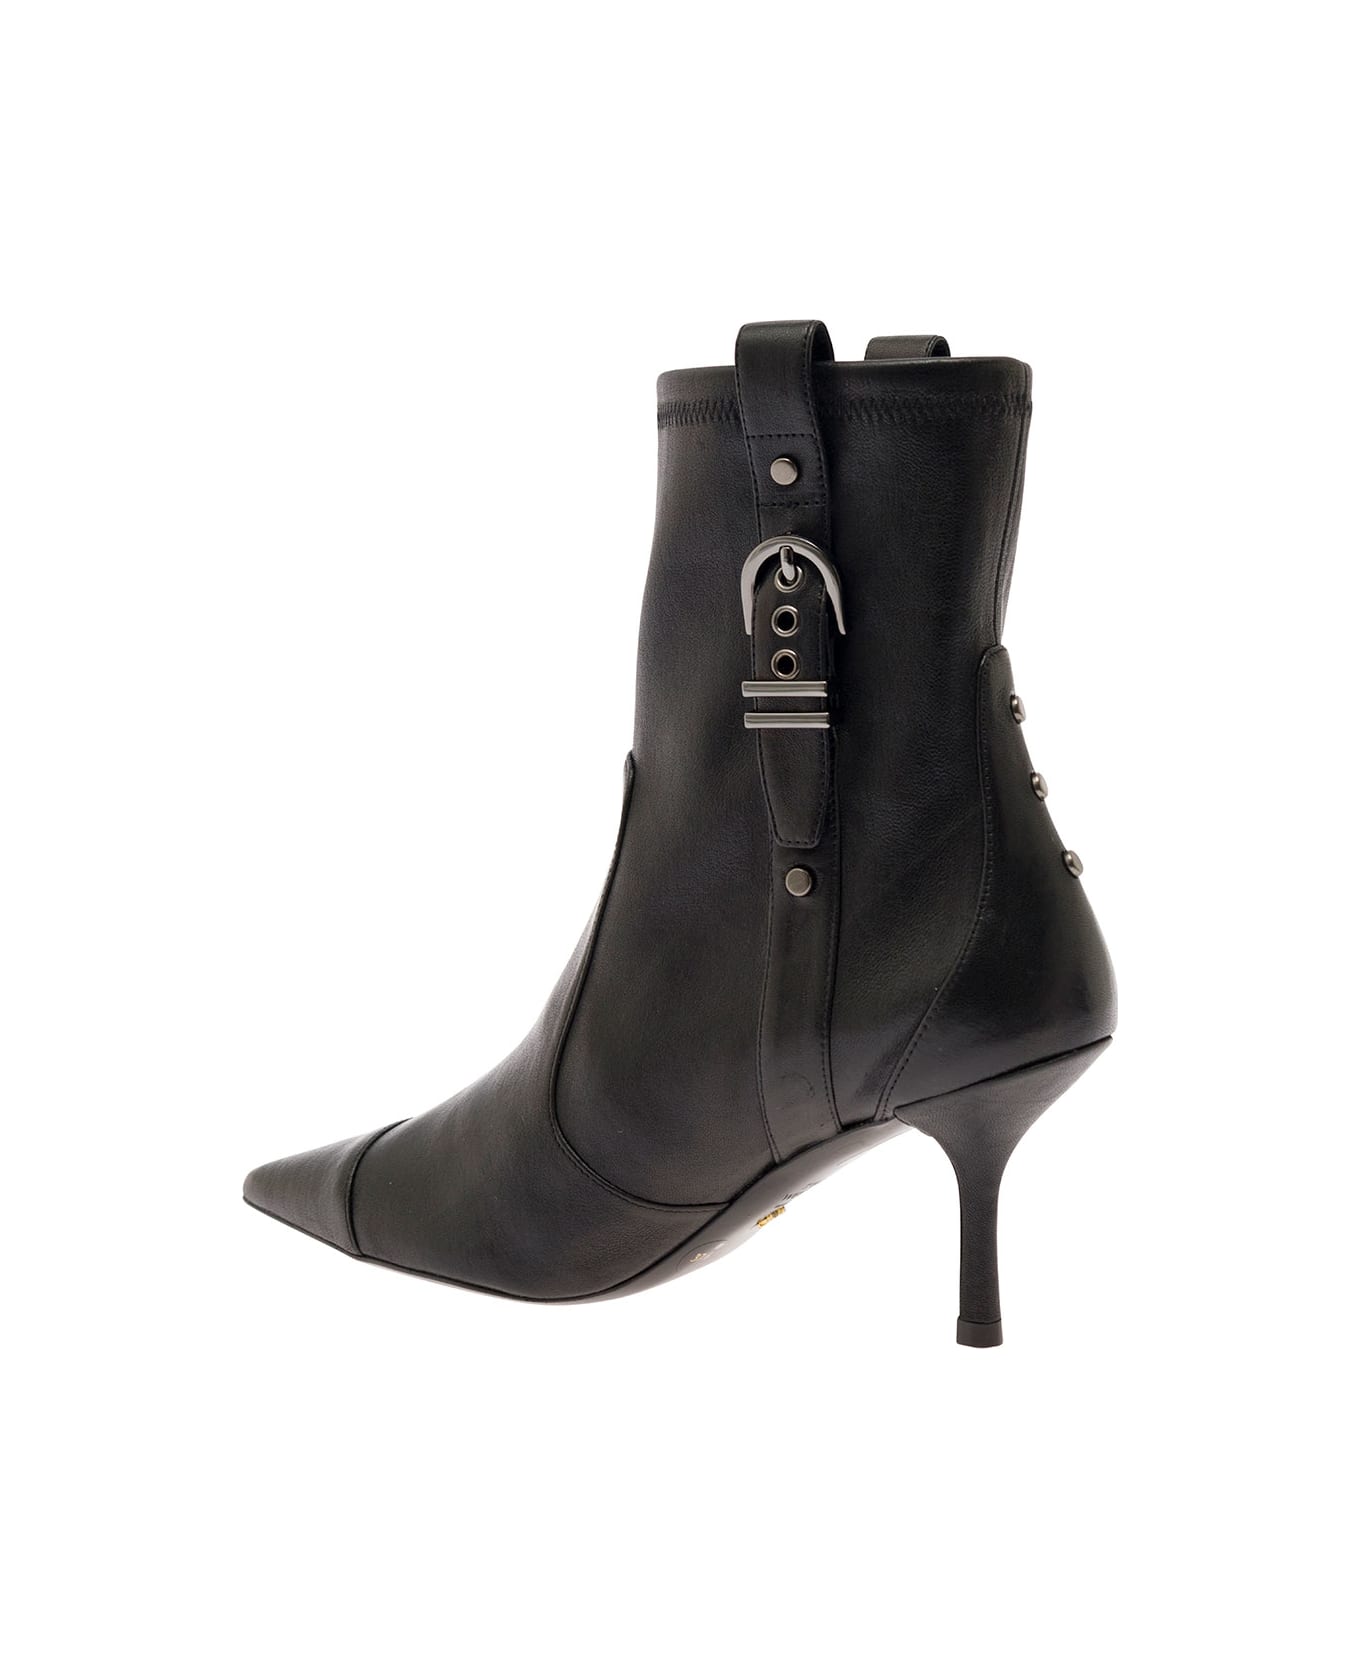 Stuart Weitzman Black Bootie With Buckle Detail And Stiletto Heel In Smooth Leather Woman - Black